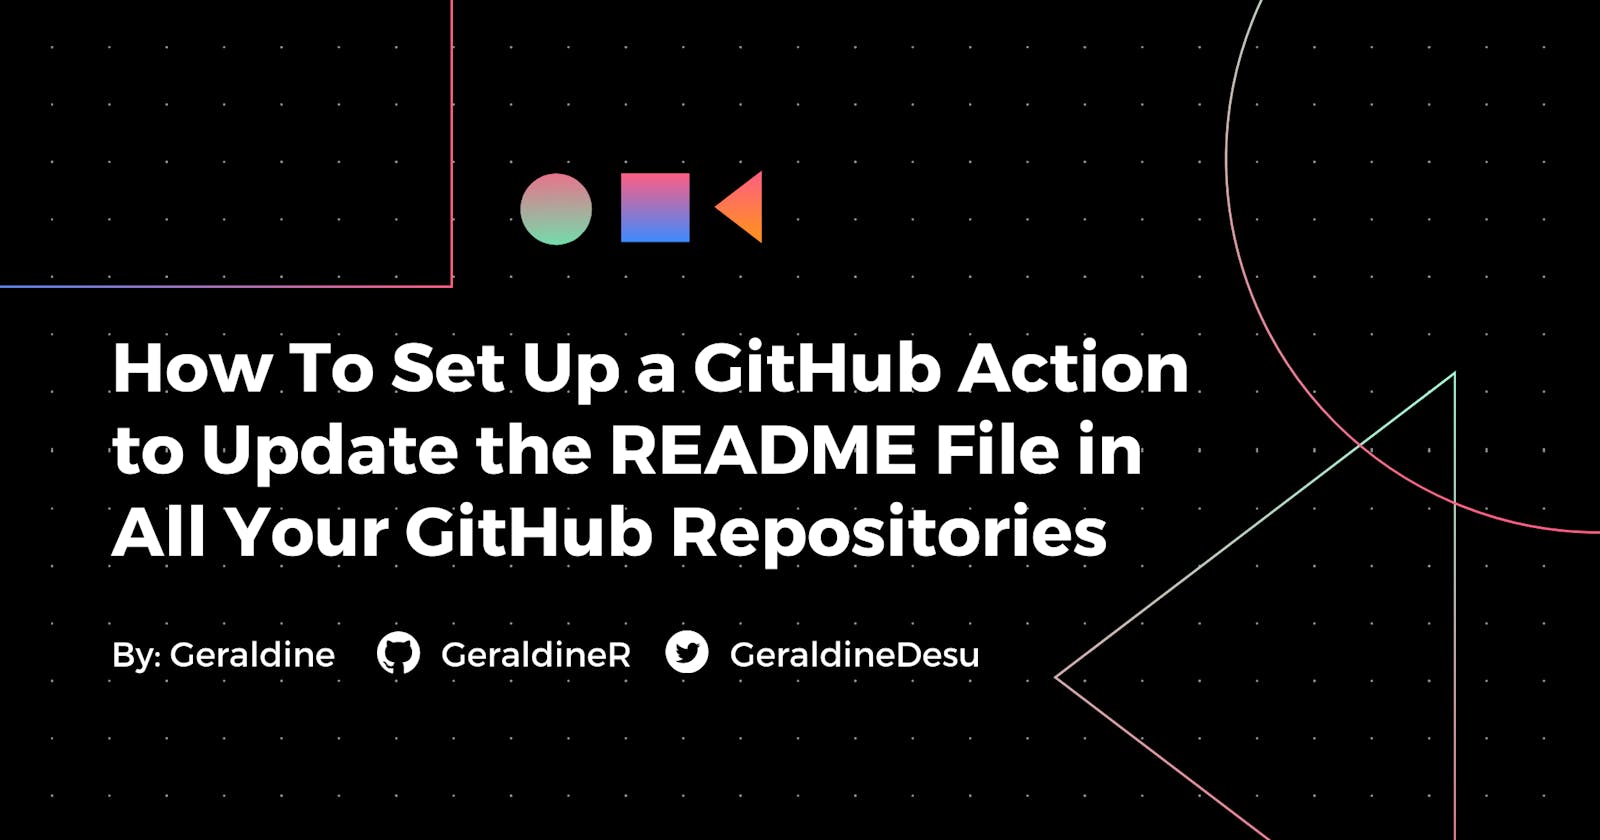 How To Set Up a GitHub Action to Update the README File in All Your GitHub Repositories